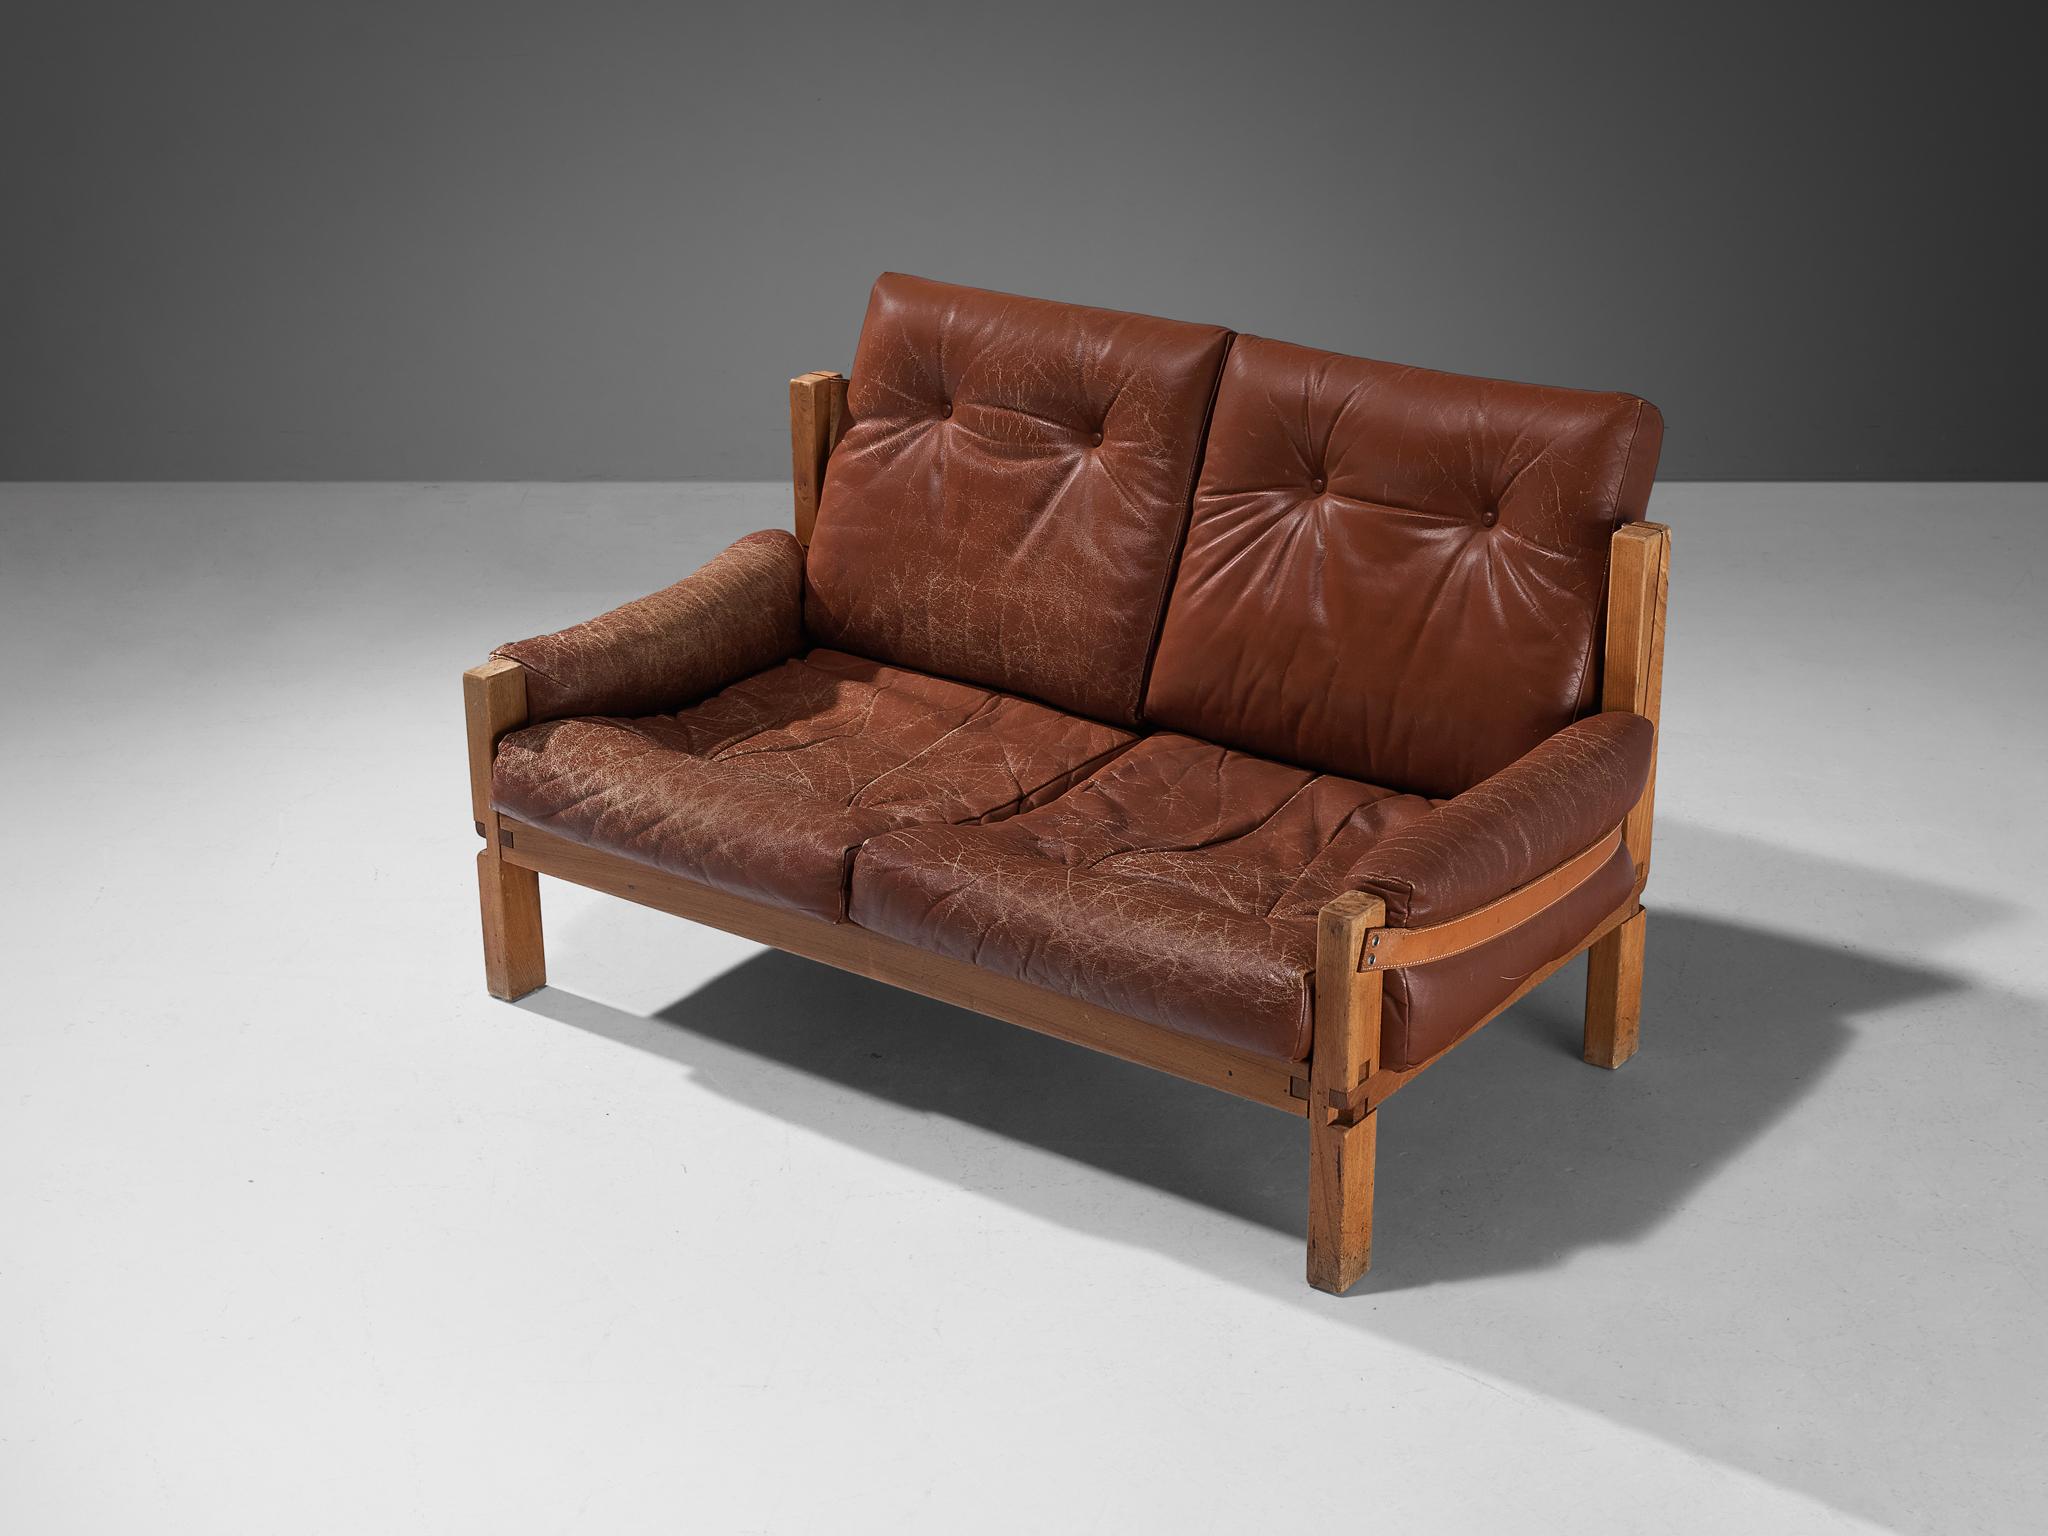 Pierre Chapo, 'S22' sofa, elm, leather, France, design 1967

This sofa is one of the early editions designed by Pierre Chapo, known for his hallmark use of solid elmwood and a commitment to pure and clean design and construction